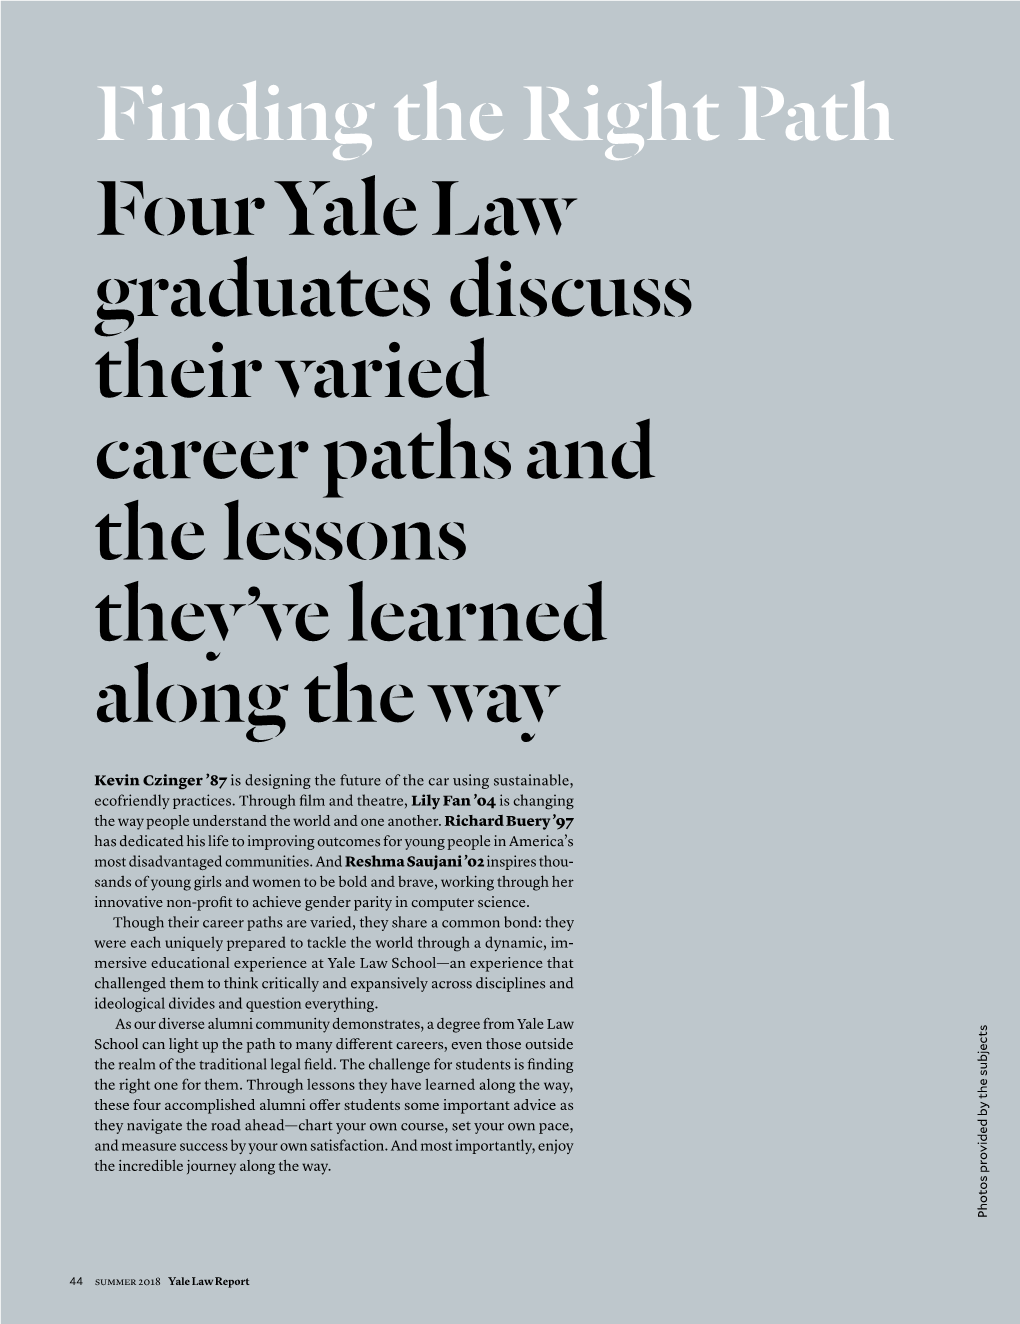 Four Yale Law Graduates Discuss Their Varied Career Paths and the Lessons They’Ve Learned Along the Way